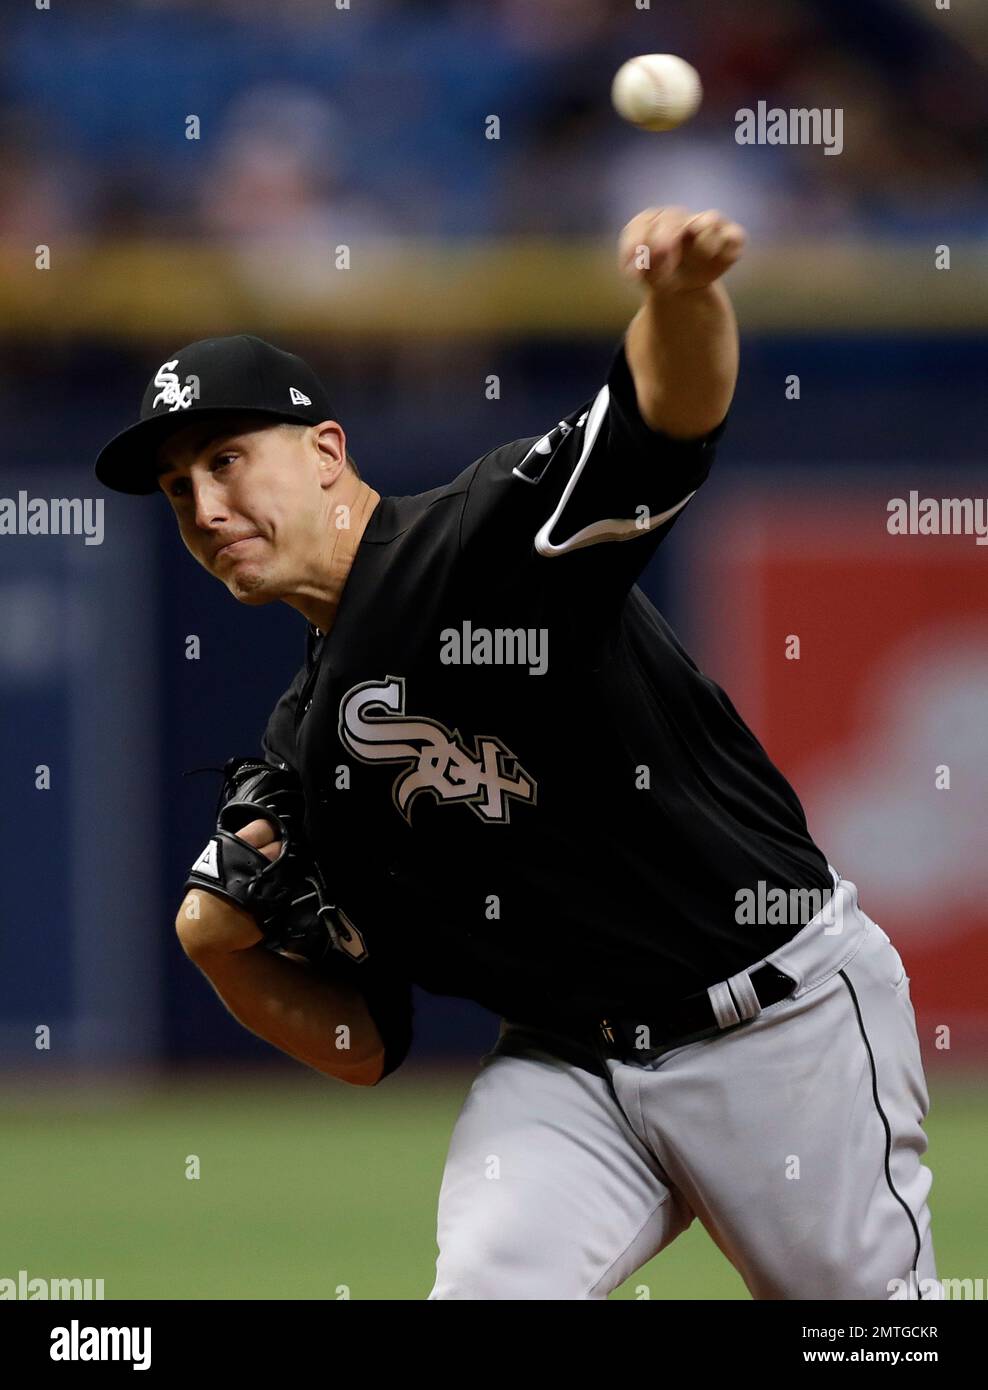 Chicago White Sox starting pitcher Derek Holland delivers to the Tampa Bay  Rays during the first inning of a baseball game Thursday, June 8, 2017, in  St. Petersburg, Fla. (AP Photo/Chris O'Meara